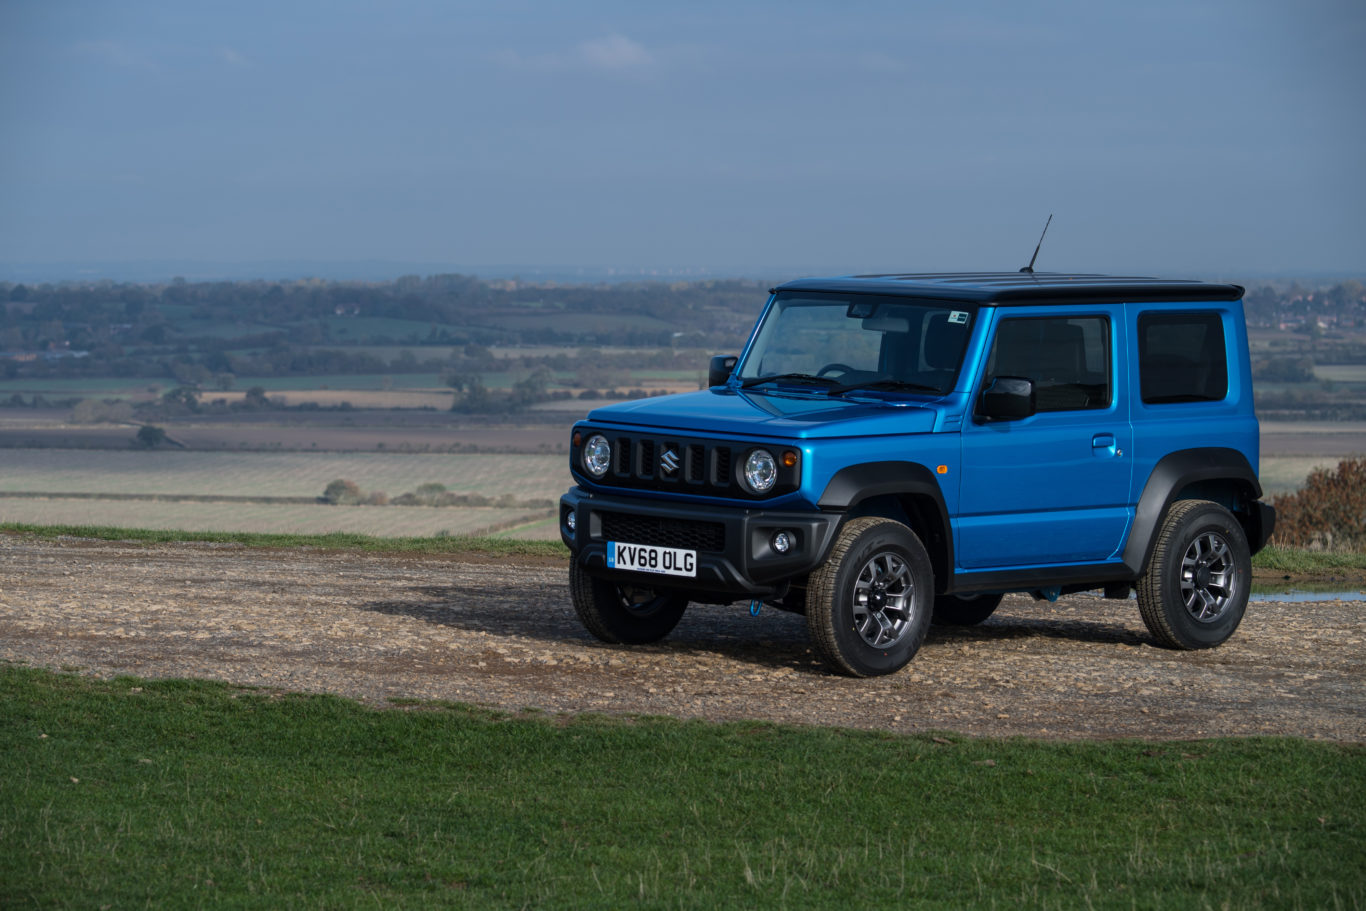 The Jimny's lack of safety tech worked against it in crash tests